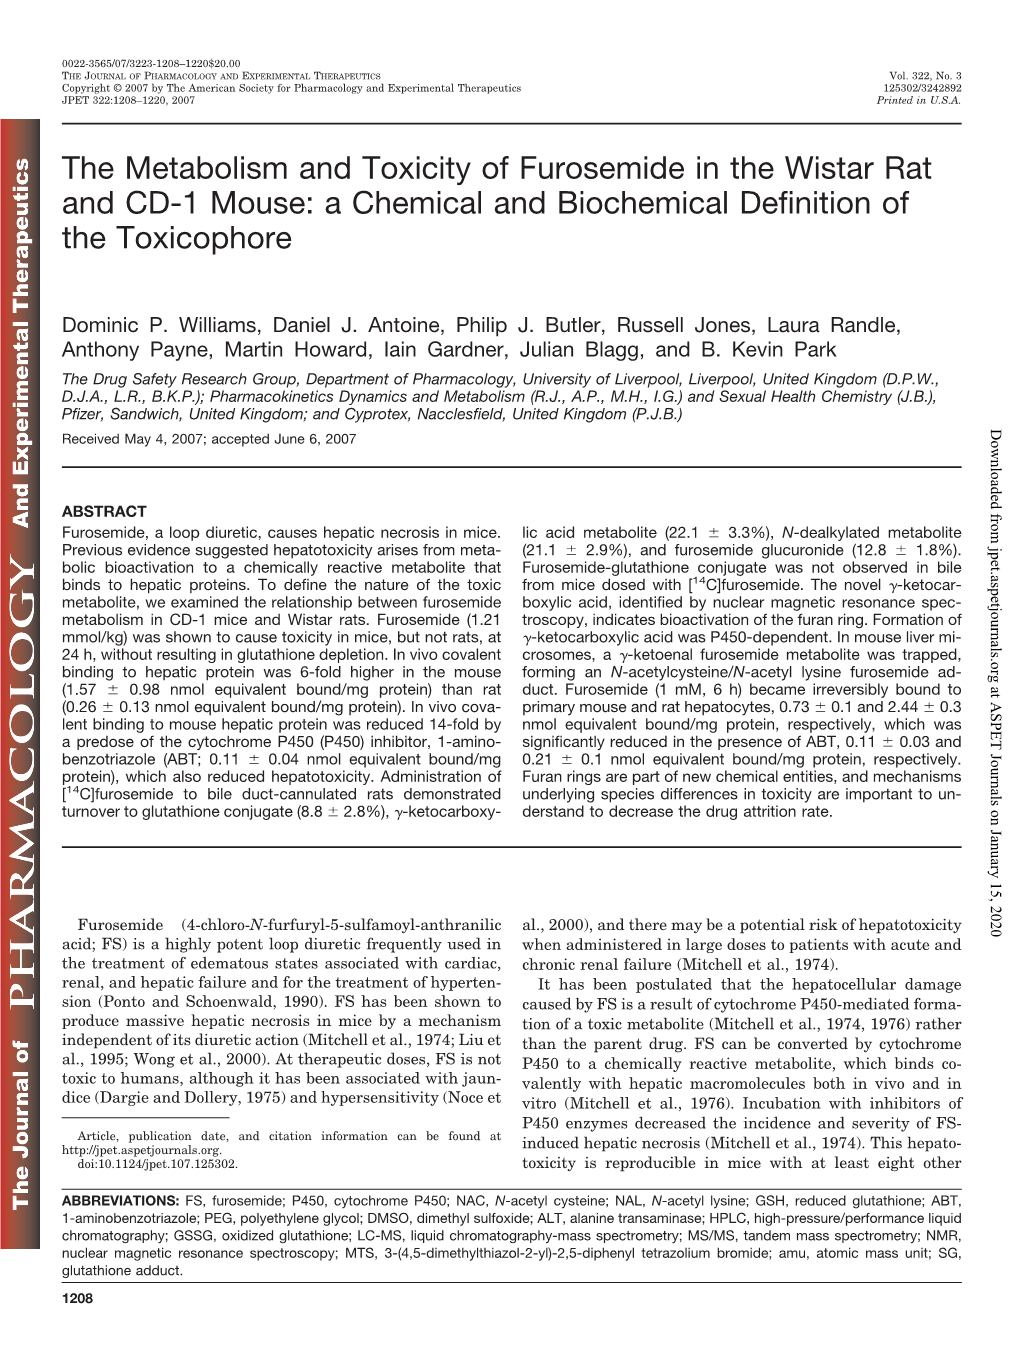 The Metabolism and Toxicity of Furosemide in the Wistar Rat and CD-1 Mouse: a Chemical and Biochemical Definition of the Toxicophore